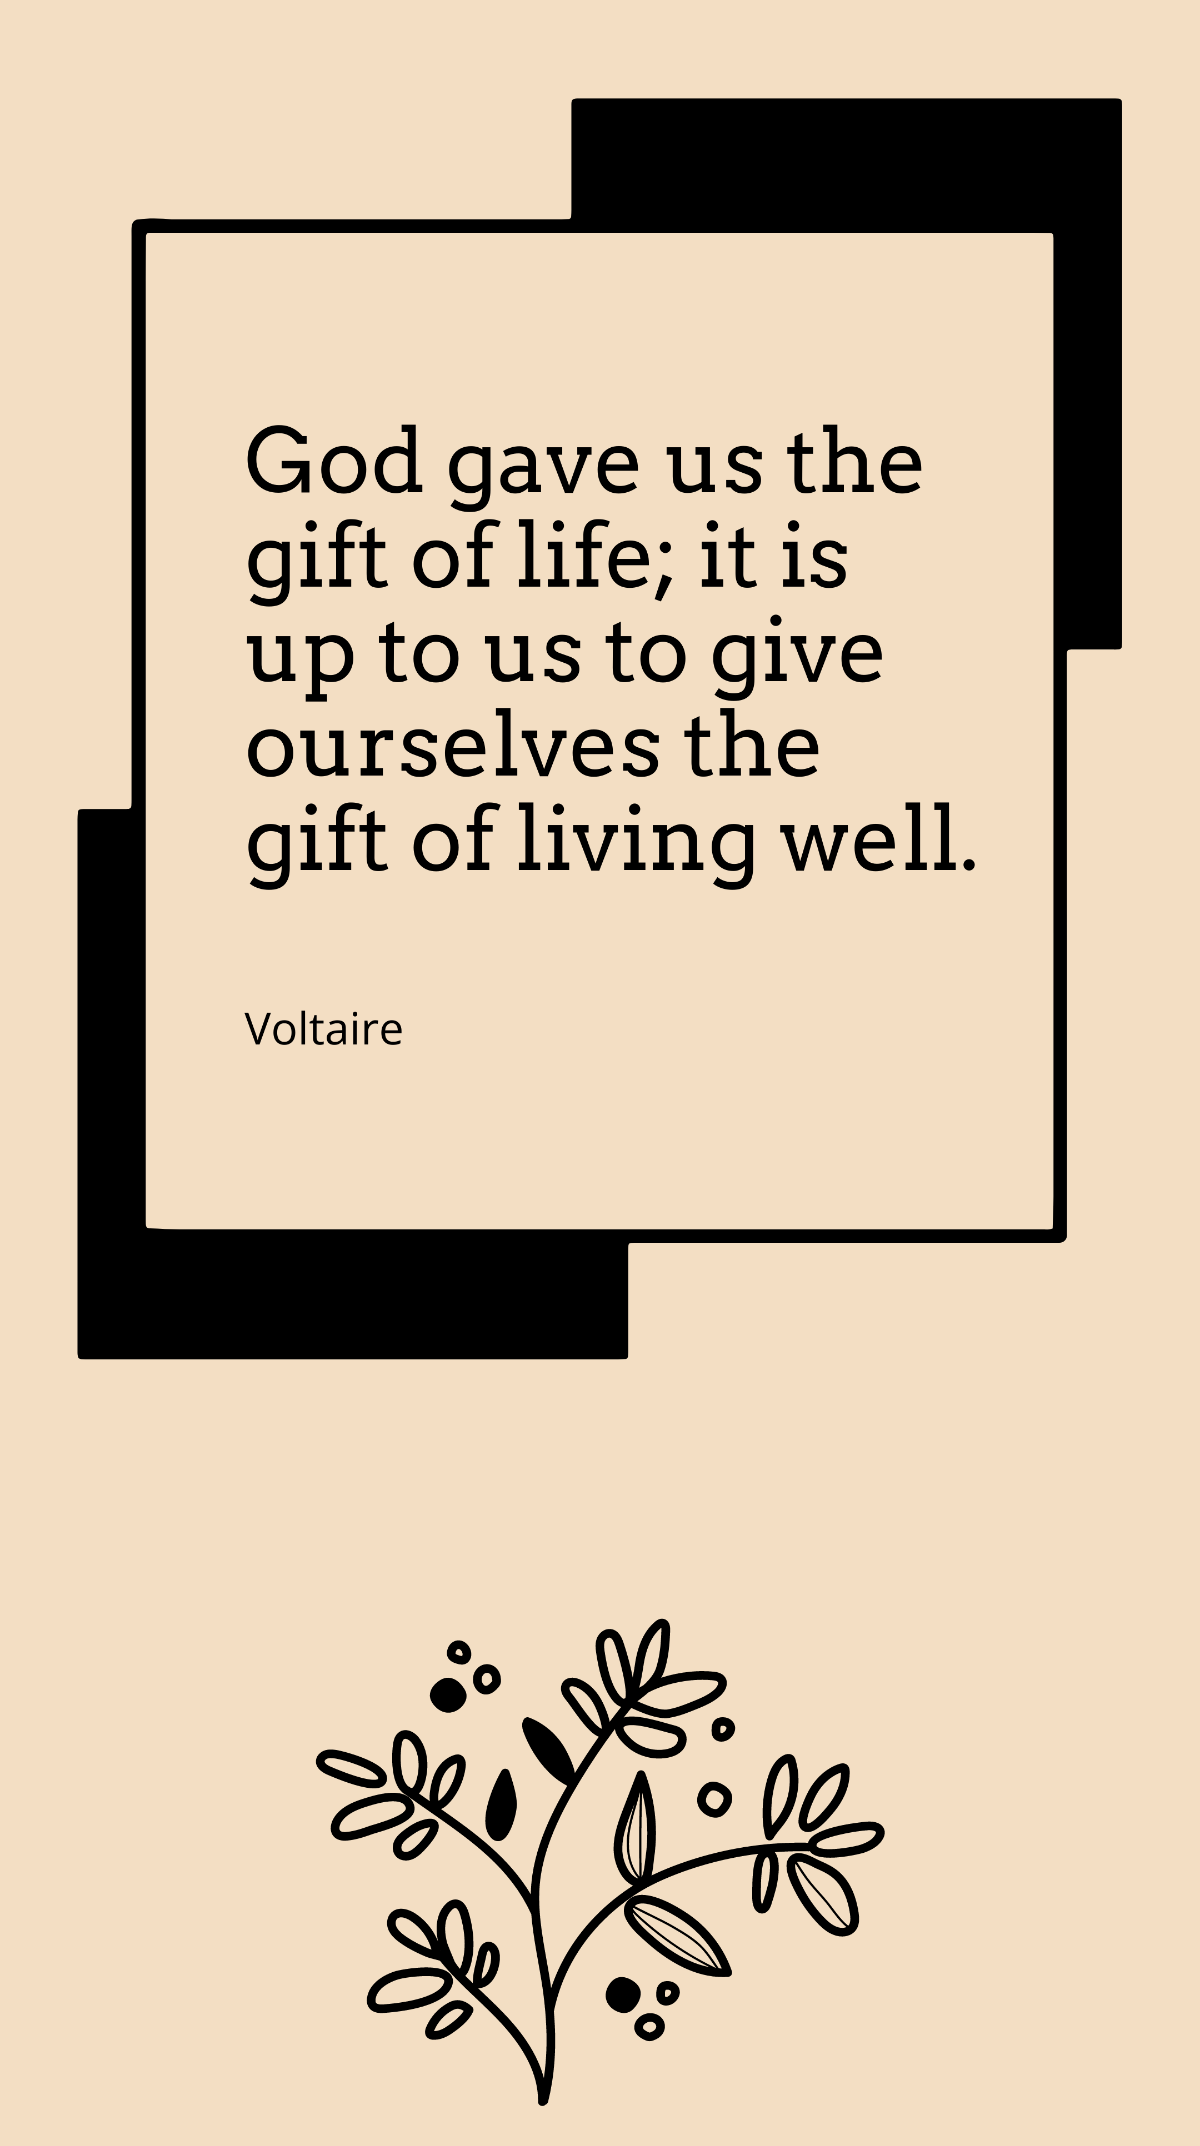 Voltaire - God gave us the gift of life; it is up to us to give ourselves the gift of living well. Template